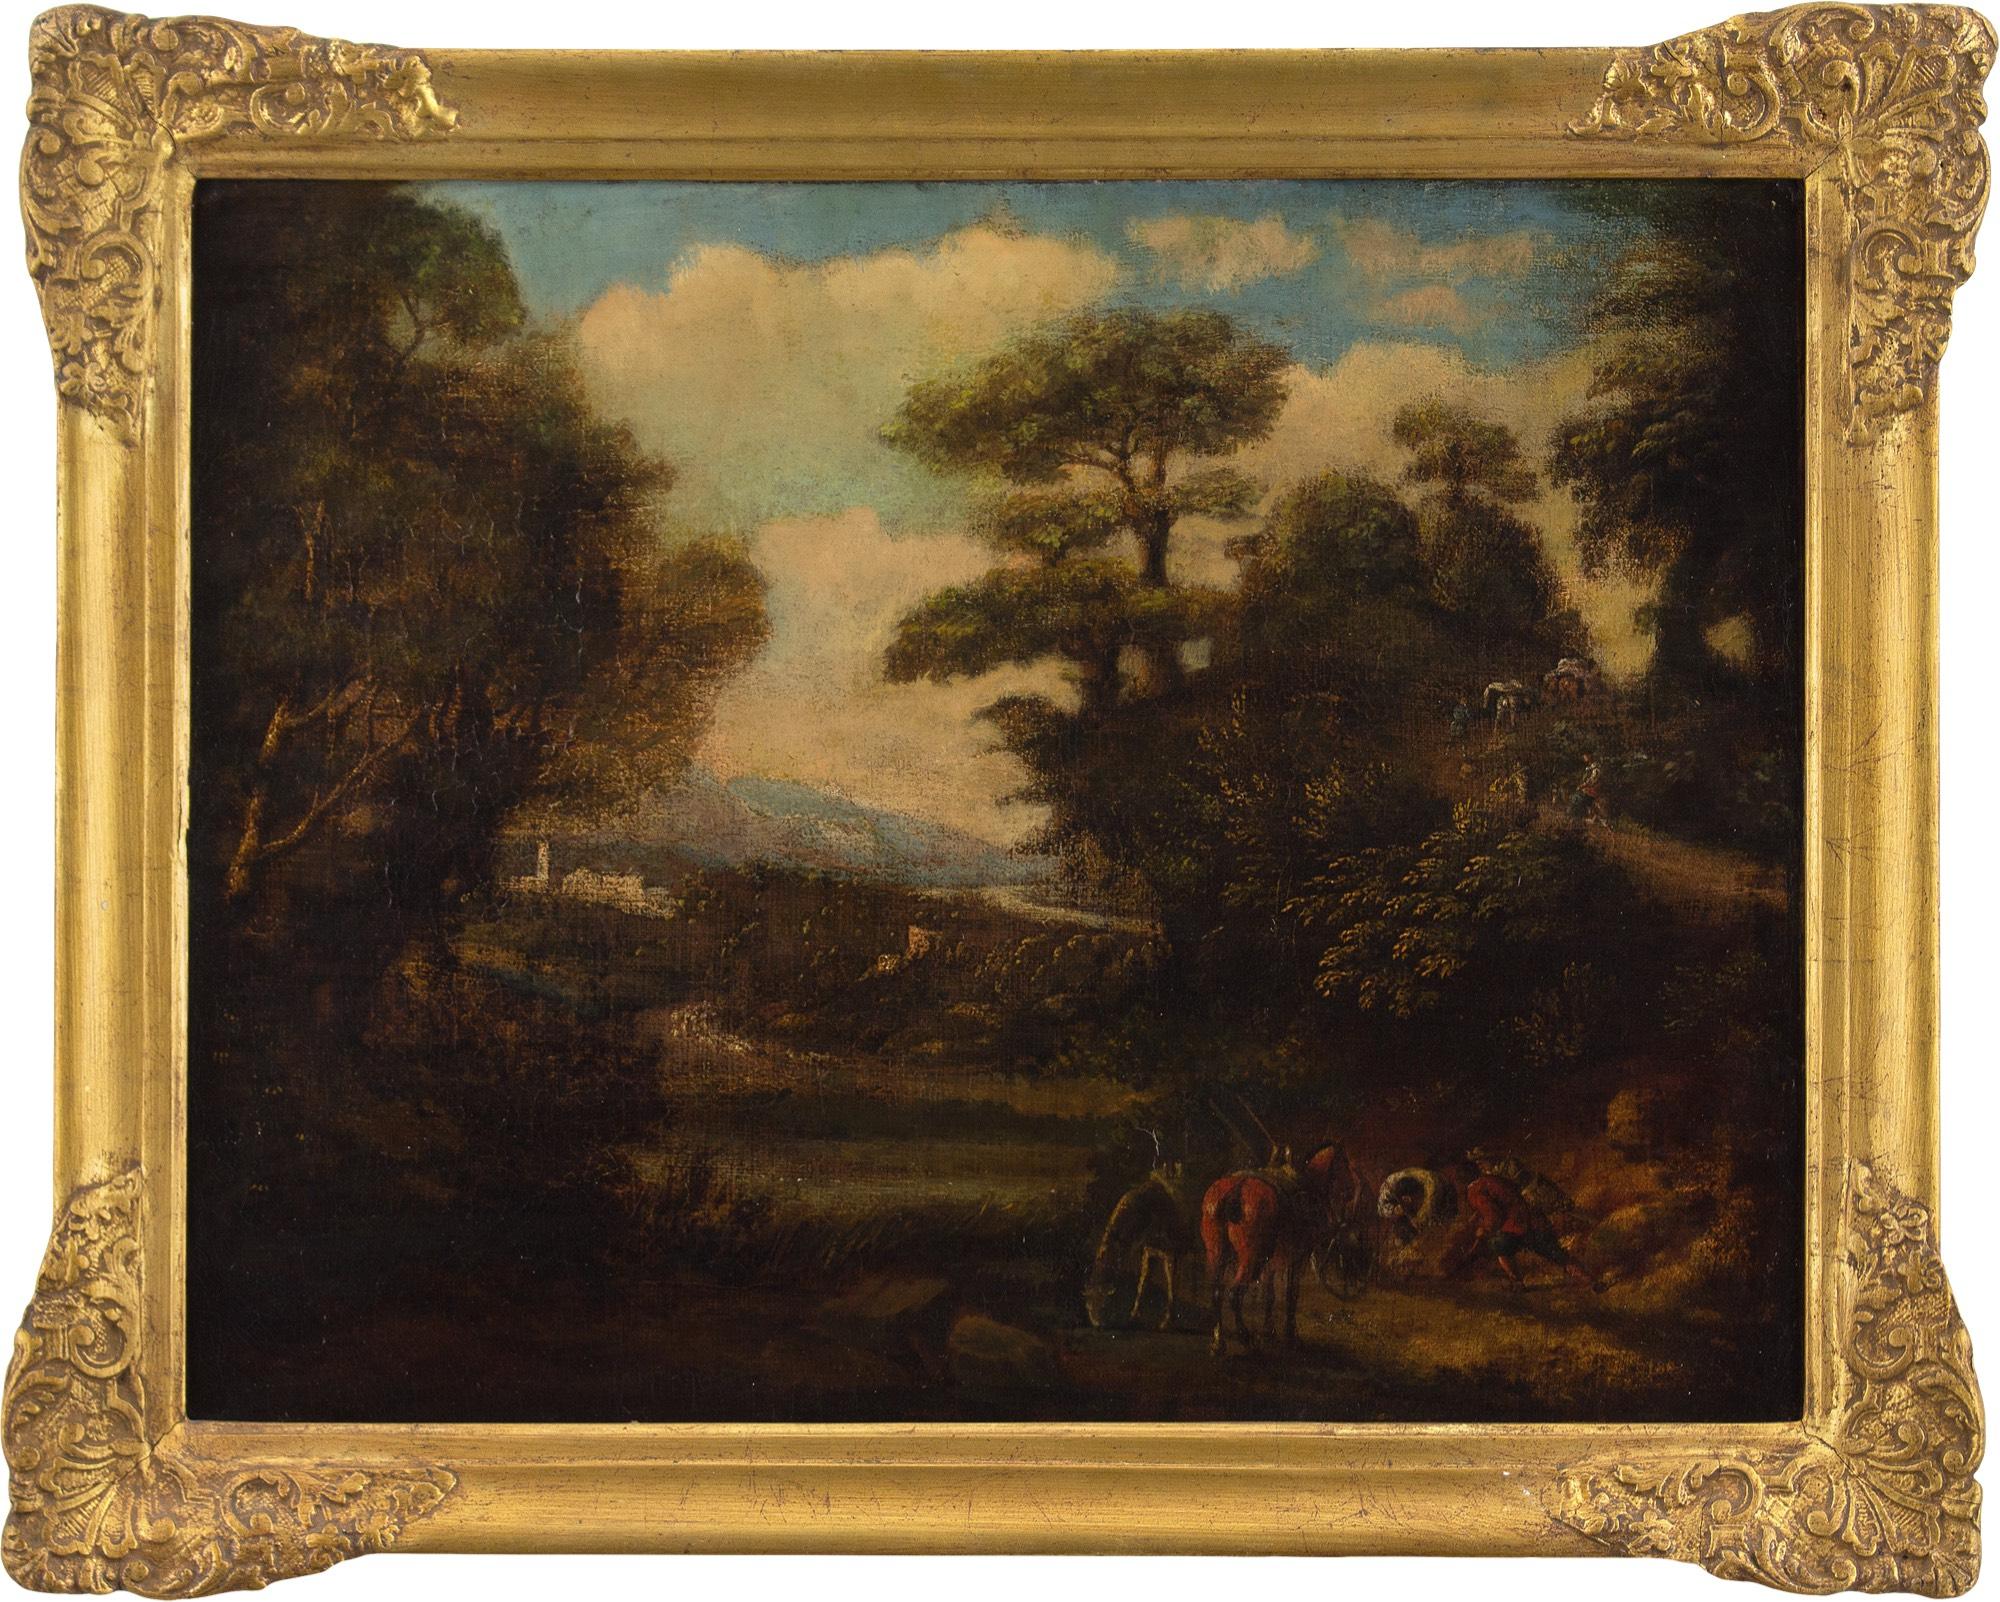 Unknown Landscape Painting - Early 18th-Century Idealised Italianate Landscape With Figures & Cattle